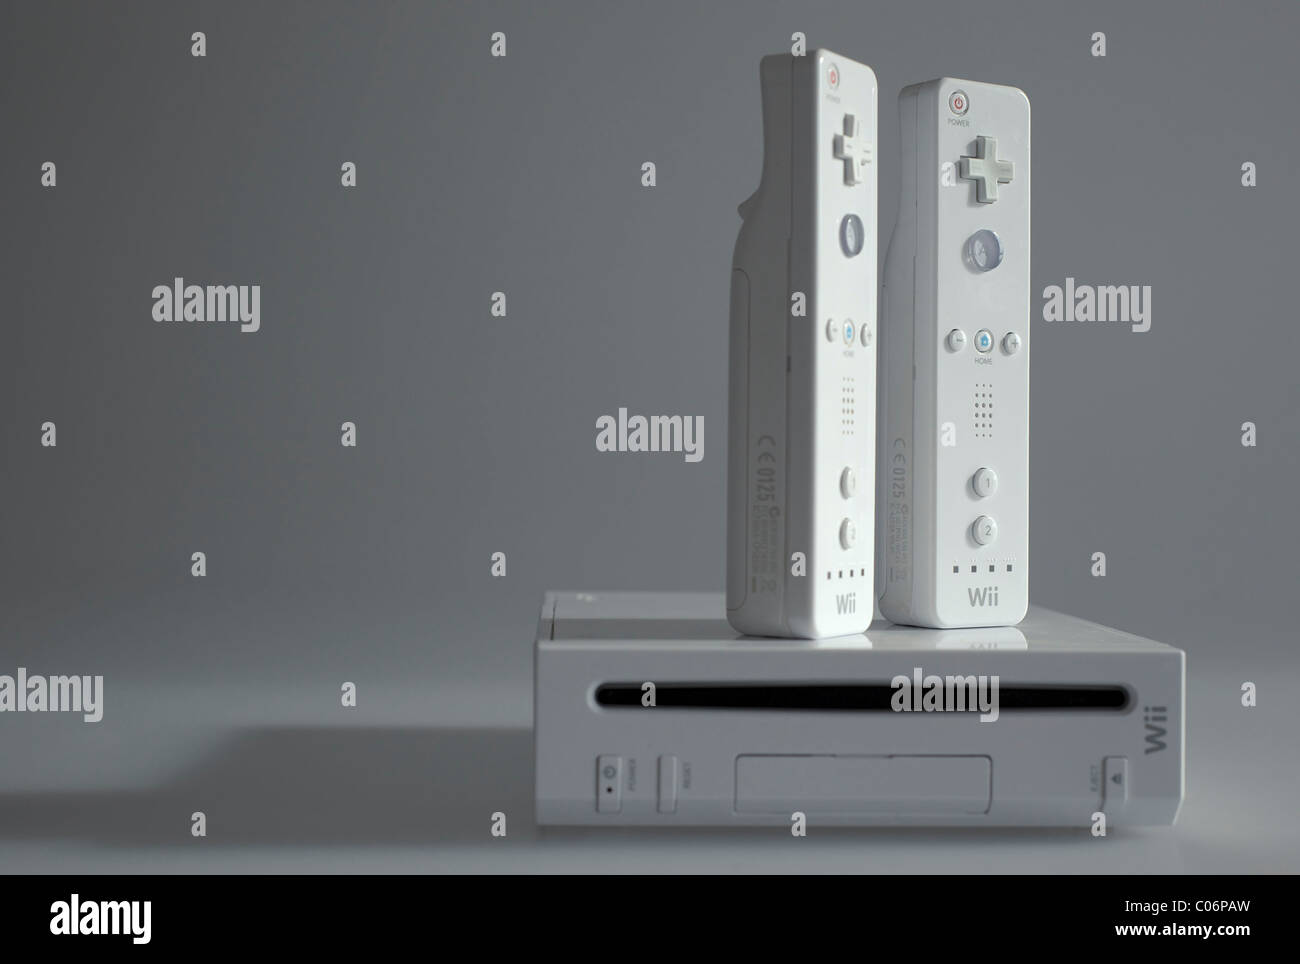 düzine tambur Amfibi  Selective focus shot of a Nintendo Wii video game console with two Wiimote  wireless controllers Stock Photo - Alamy